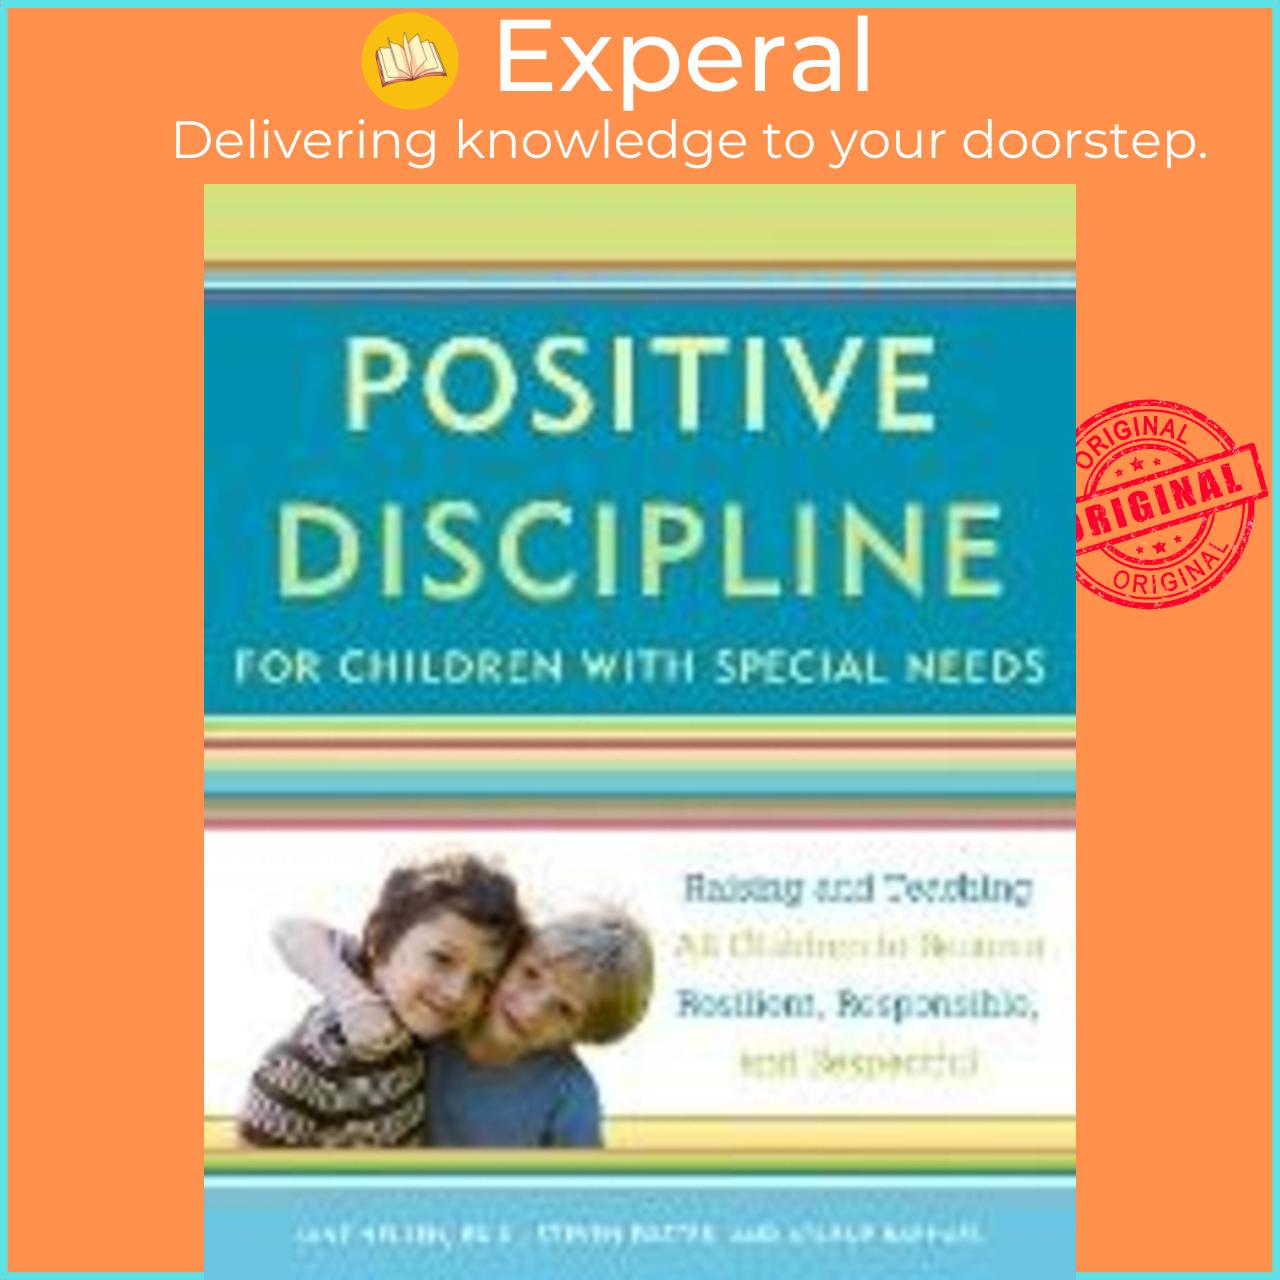 Sách - Positive Discipline For Children With Special Needs by Steven Foster (US edition, paperback)